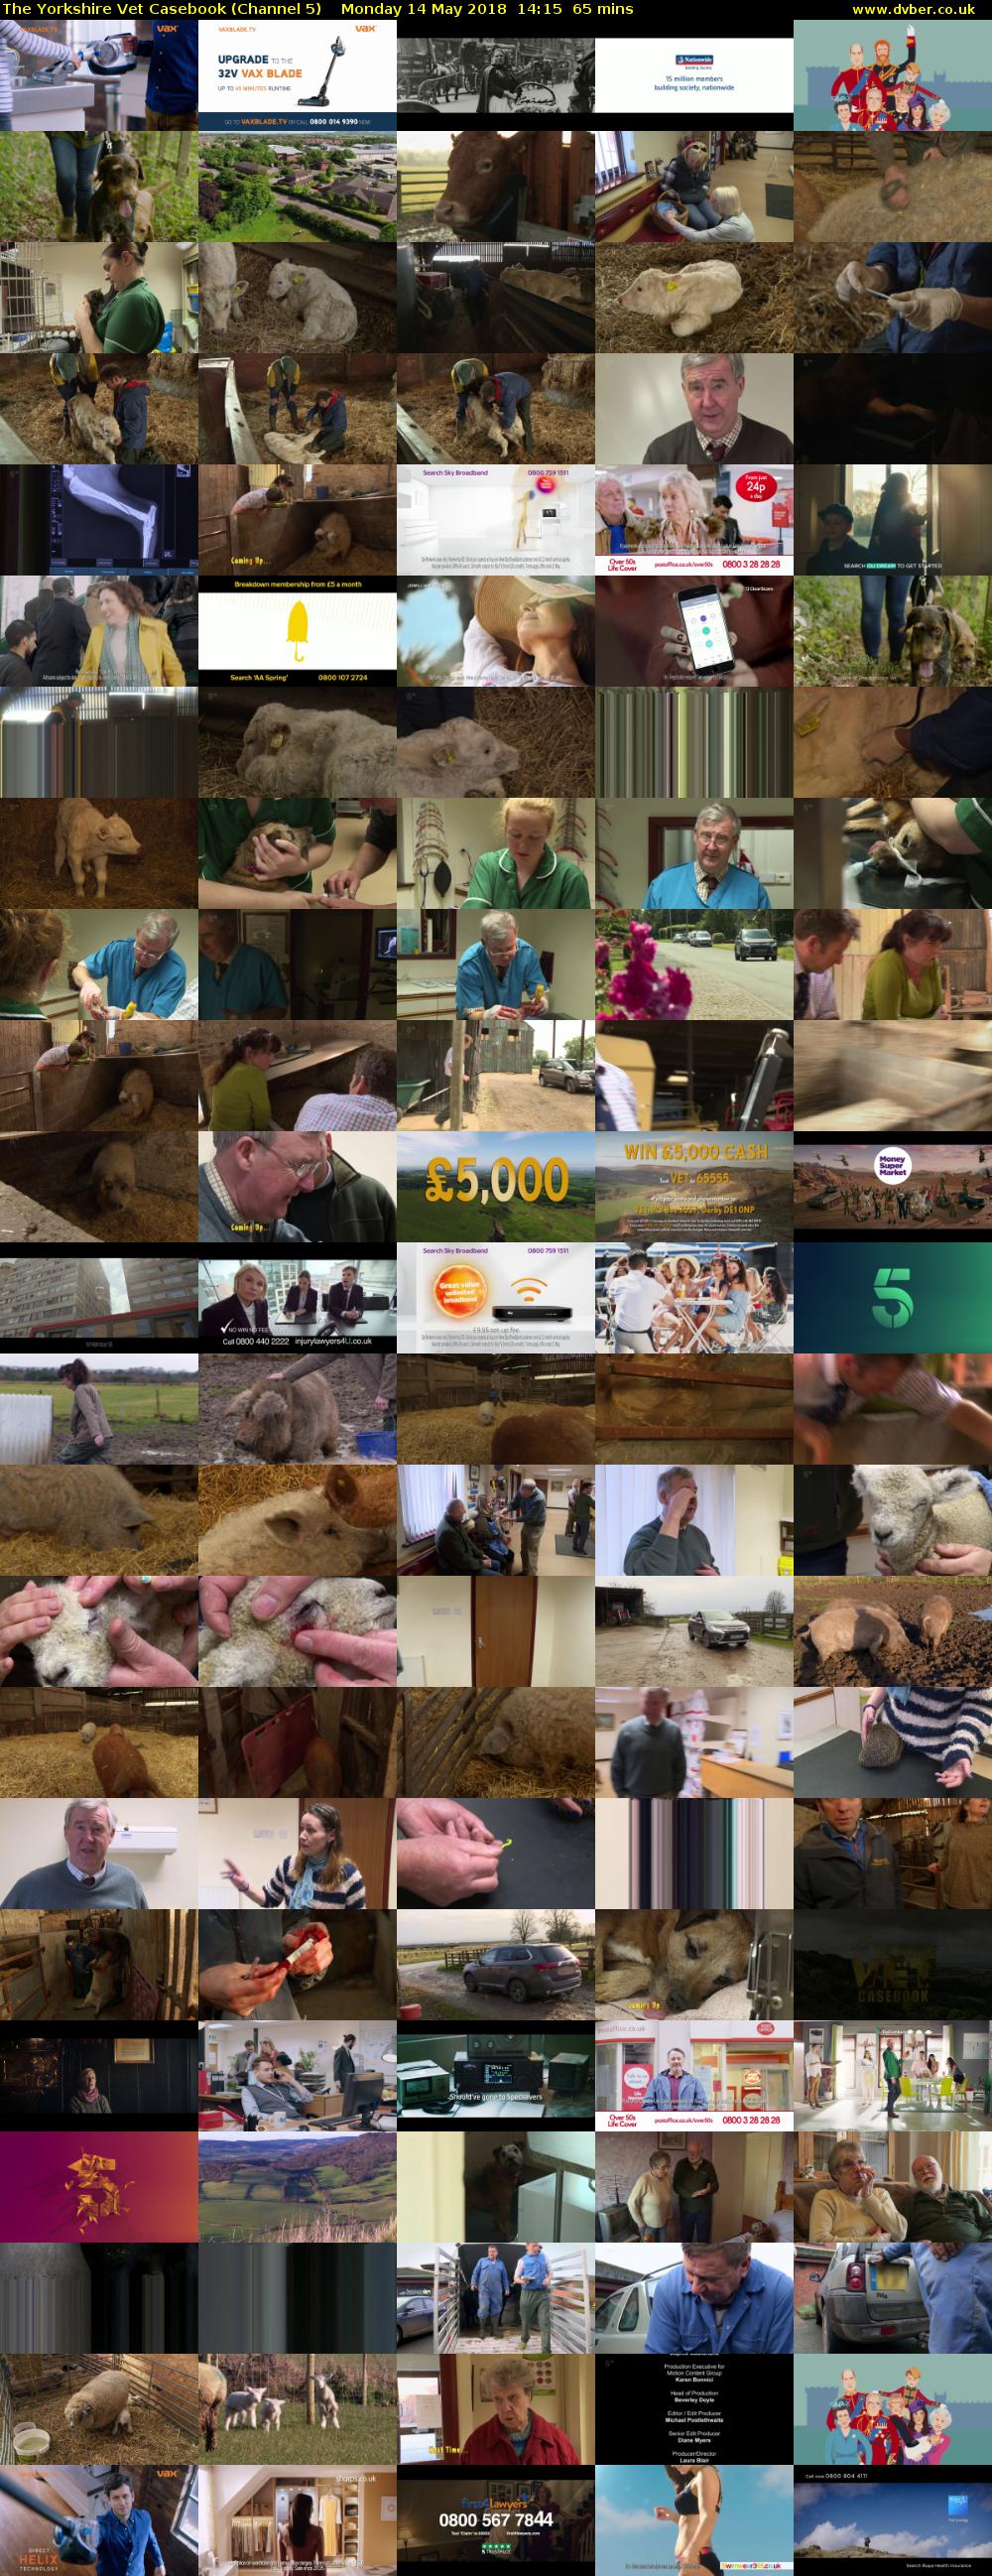 The Yorkshire Vet Casebook (Channel 5) Monday 14 May 2018 14:15 - 15:20